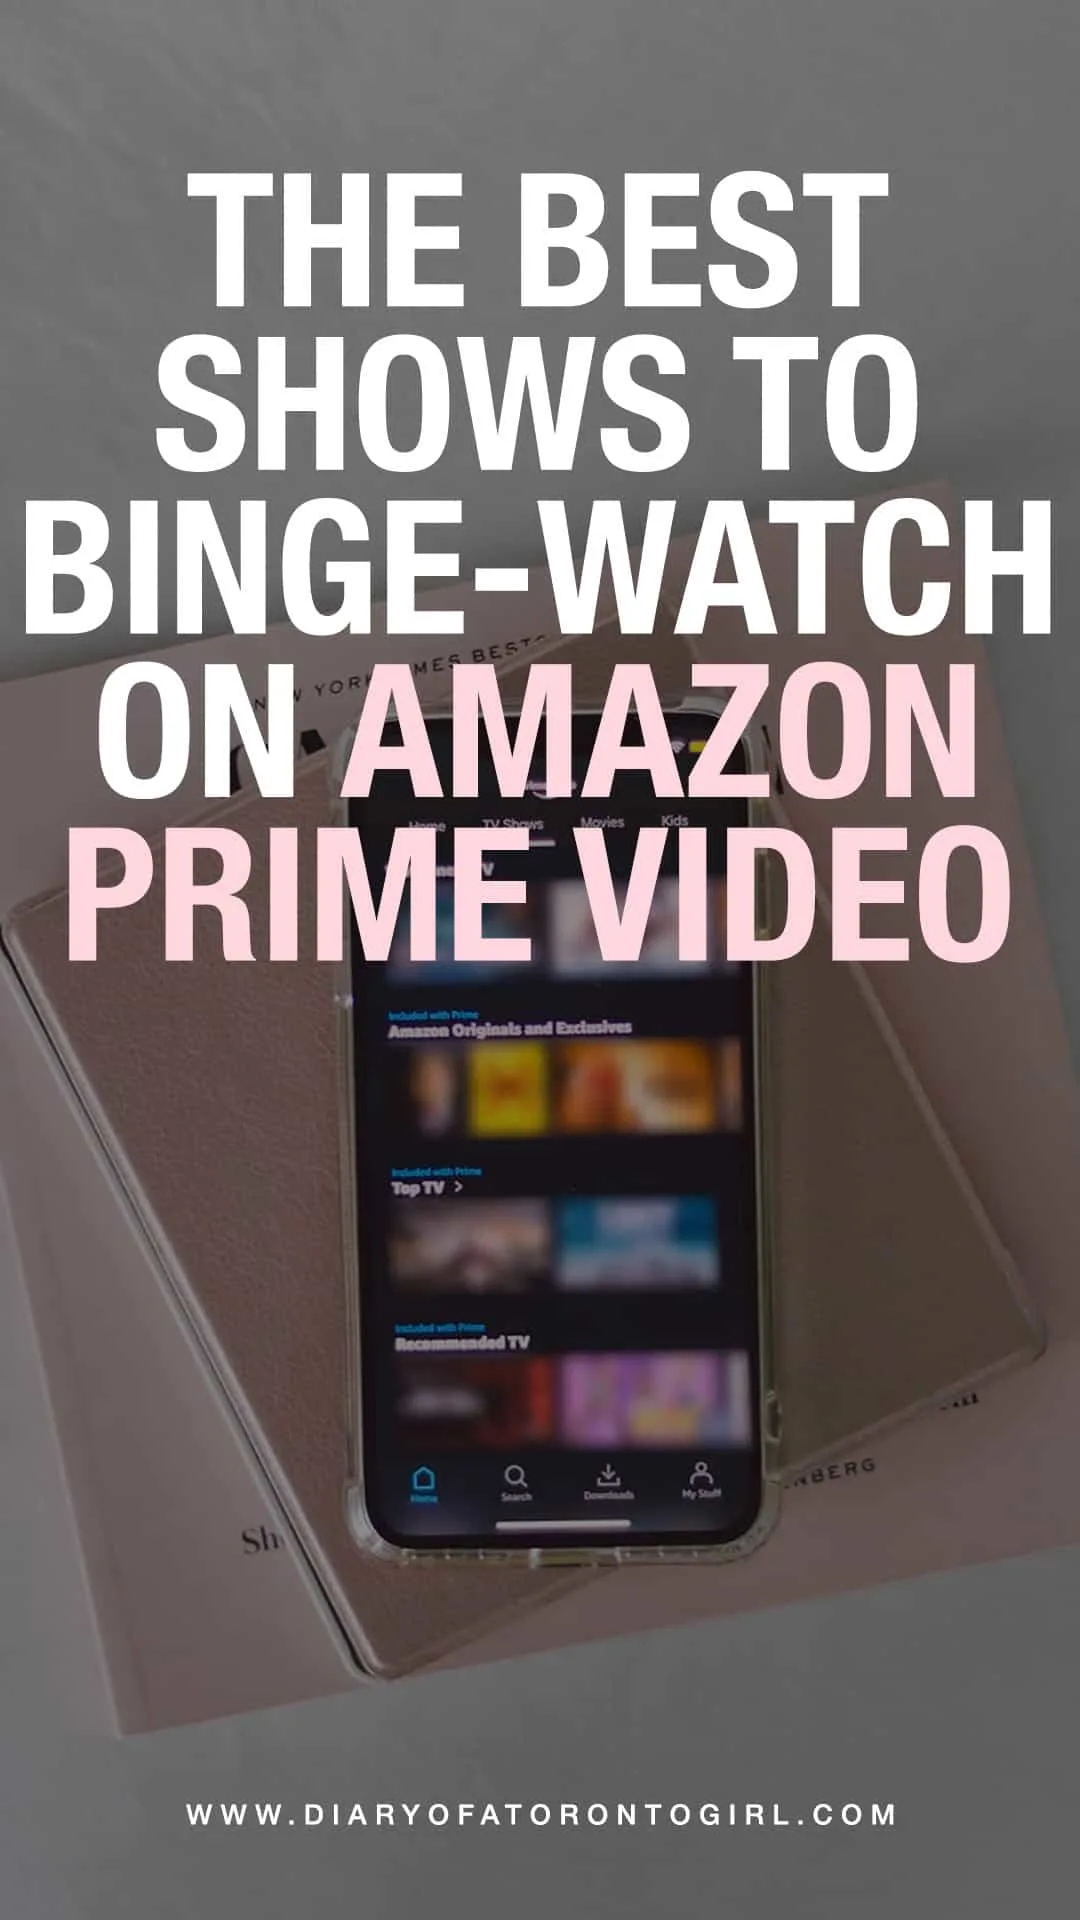 Looking for a great new show to binge-watch? Here are some of the best television series and shows to watch on Amazon Prime Video in Canada!